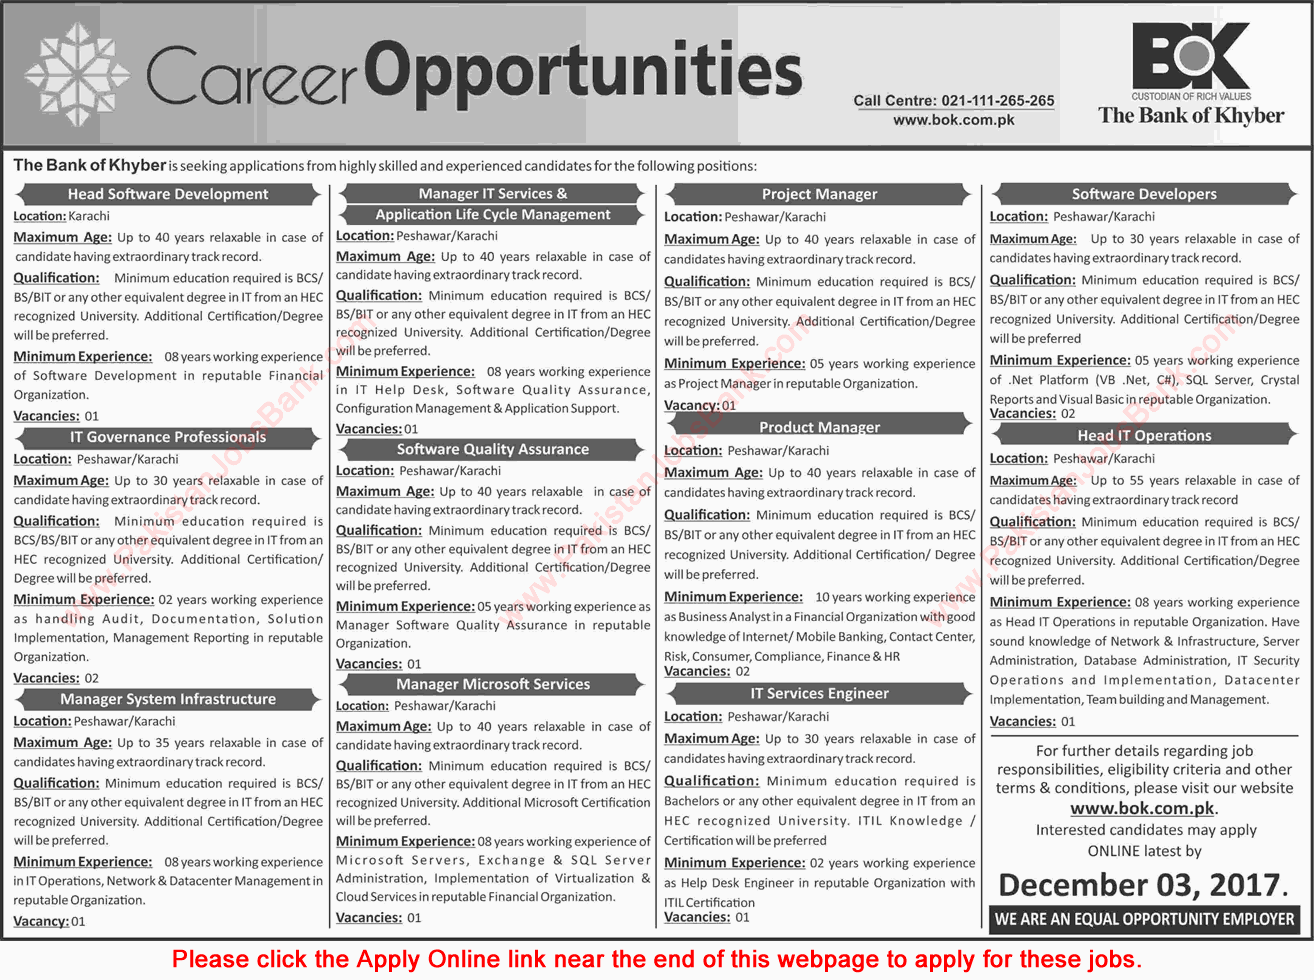 Bank of Khyber Jobs November 2017 December Apply Online Software Developers, Product Managers & Others Latest